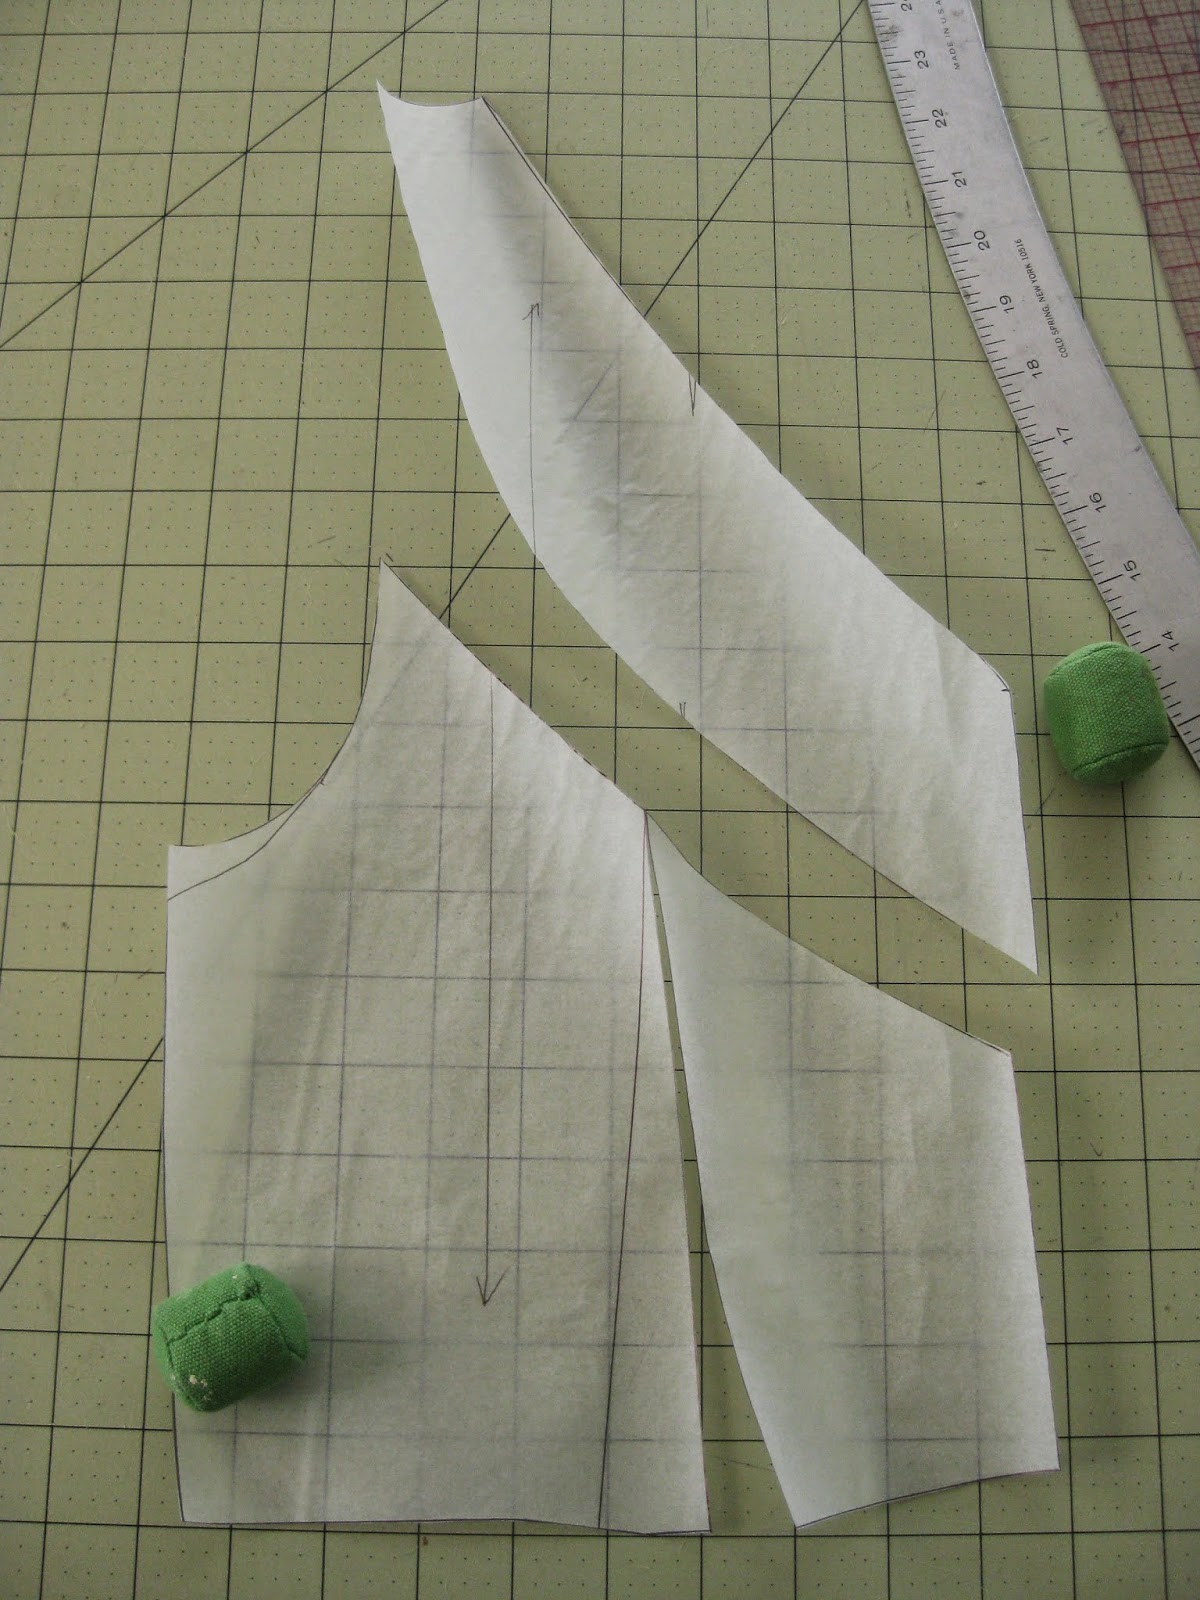 Handmade By Heather B: How to Draft a Bodice with a Diagonal Princess Line